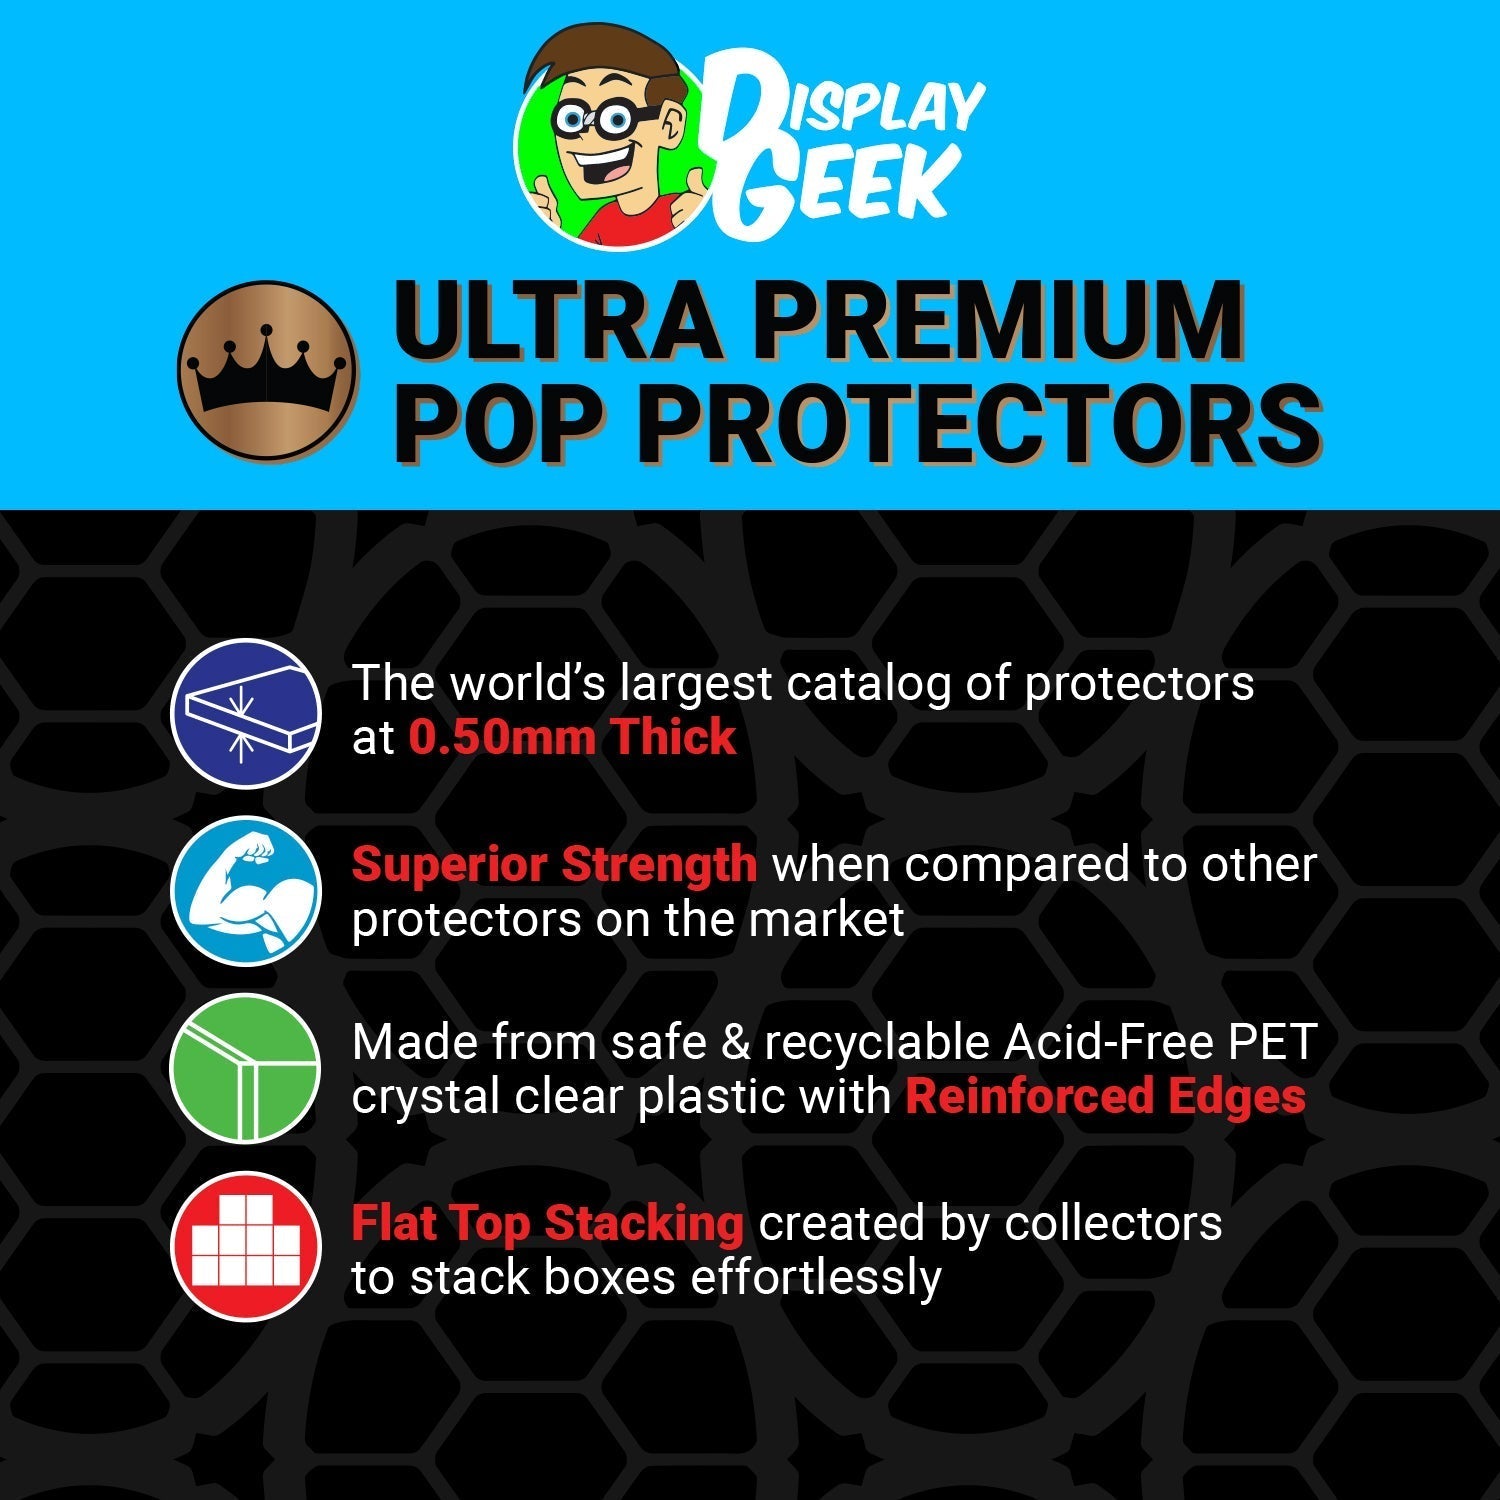 Pop Protector for Baby Pegasus Funko Pop Pez - PPG Pop Protector Guide Search Created by Display Geek